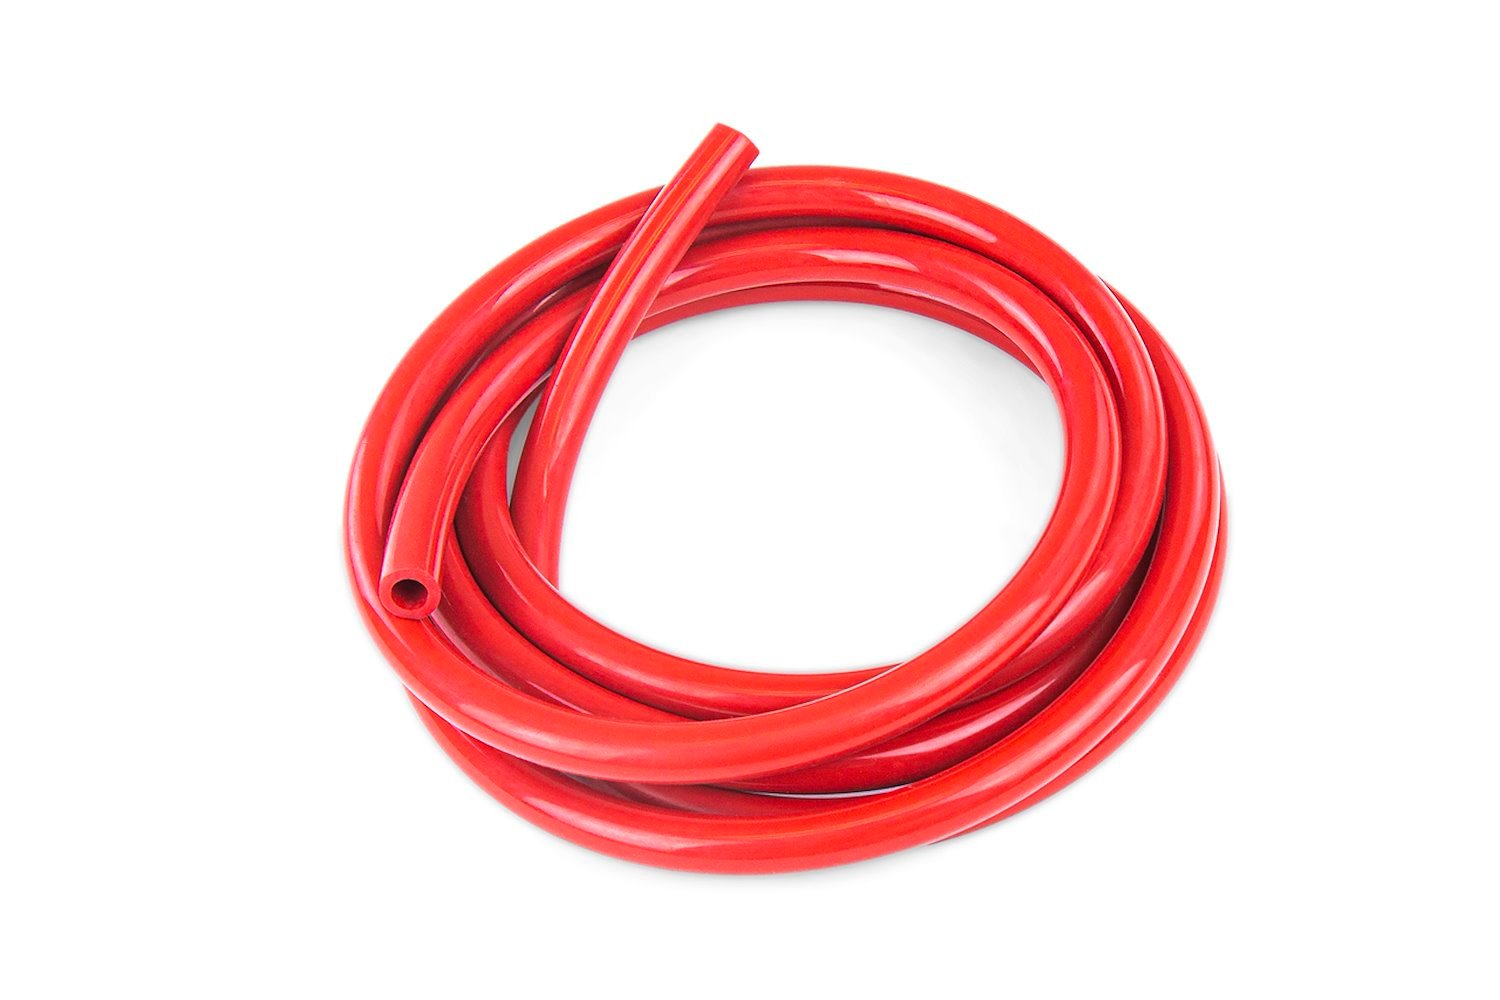 HTSVH35-REDx25 High-Temperature Silicone Vacuum Hose Tubing, 3.5 mm ID, 25 ft. Roll, Red